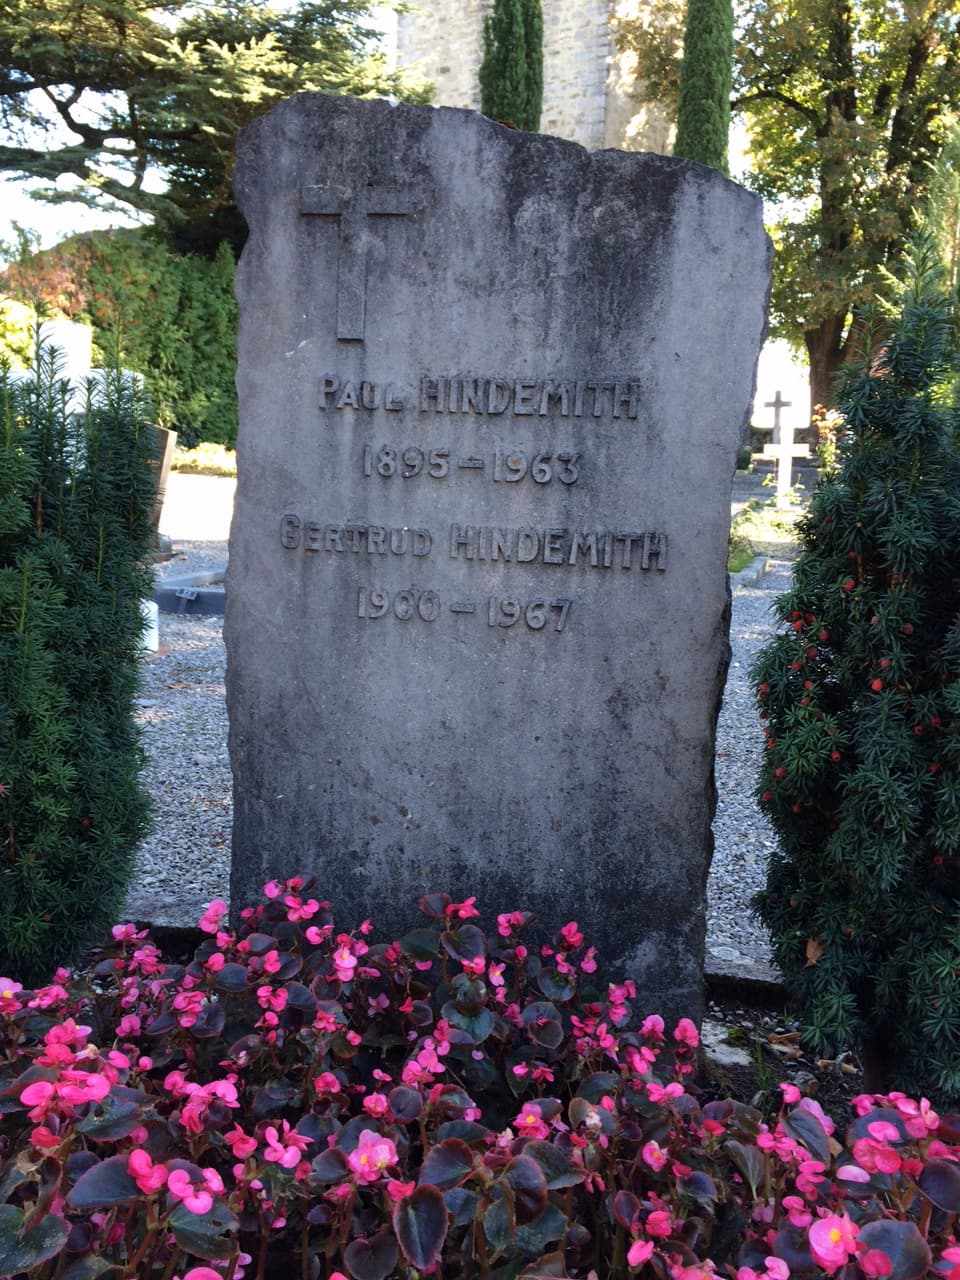 Grave of Paul Hindemith